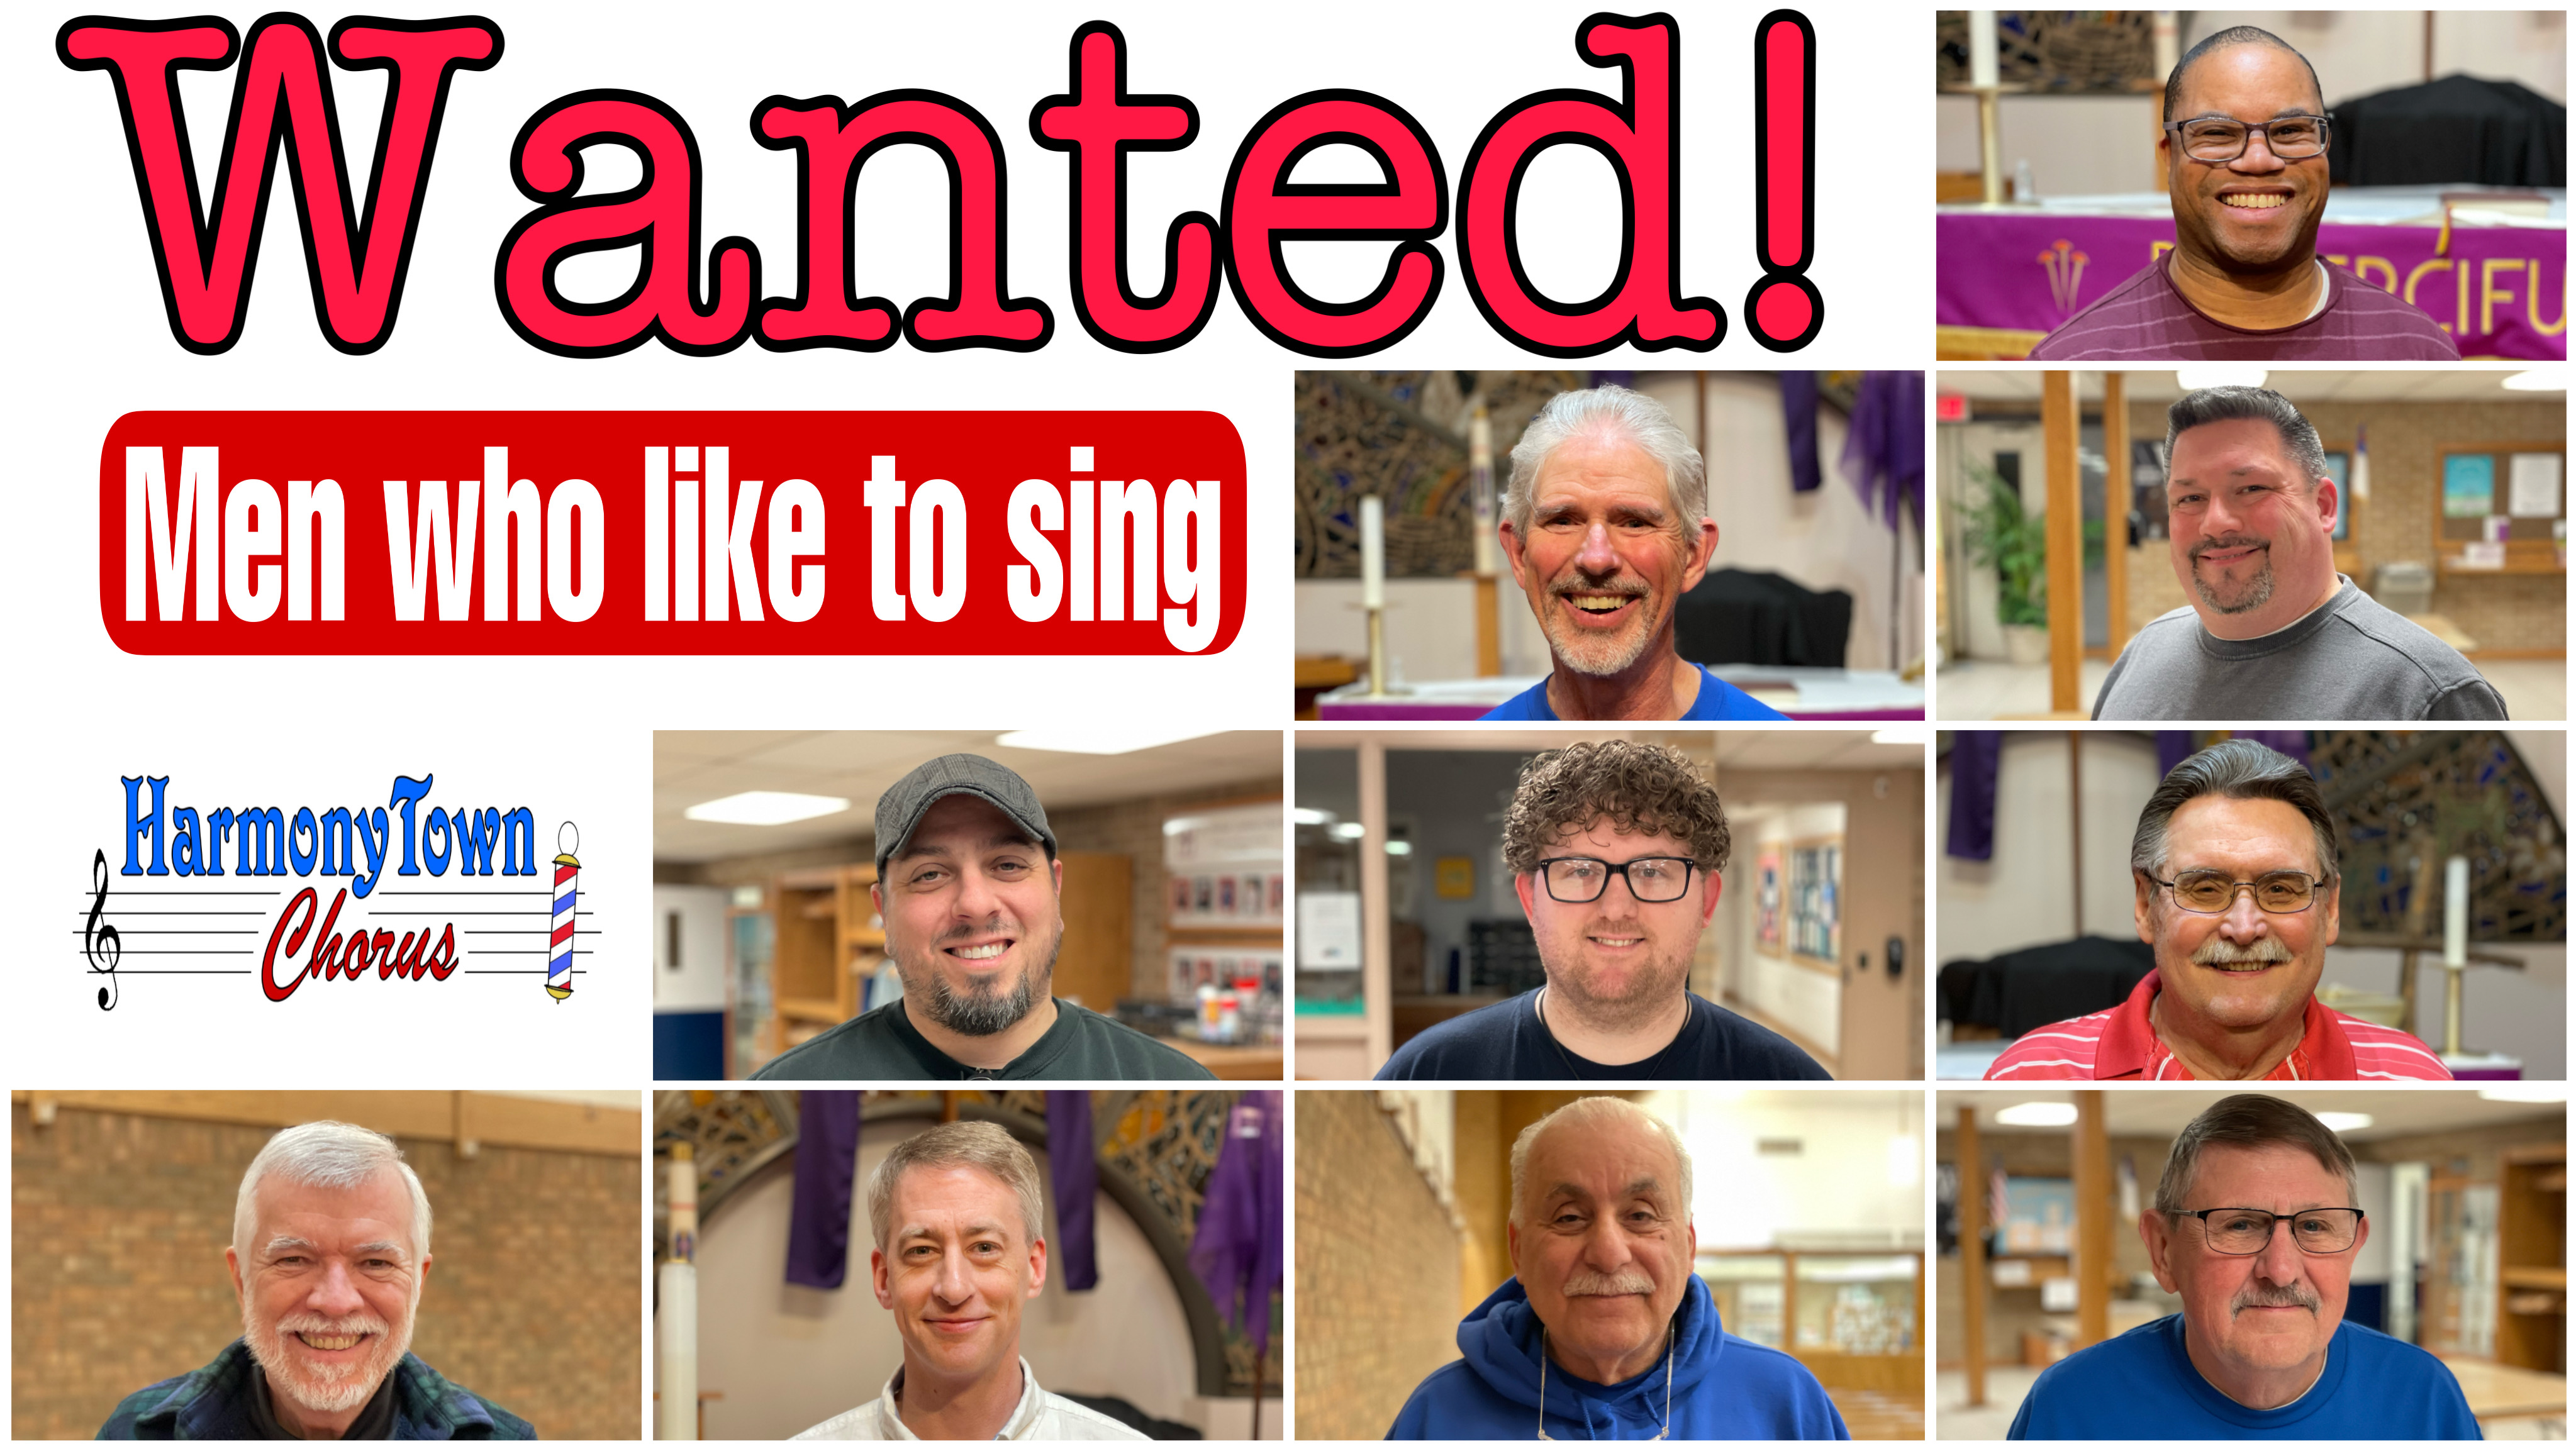 Guest Night - Men come & sing with us!